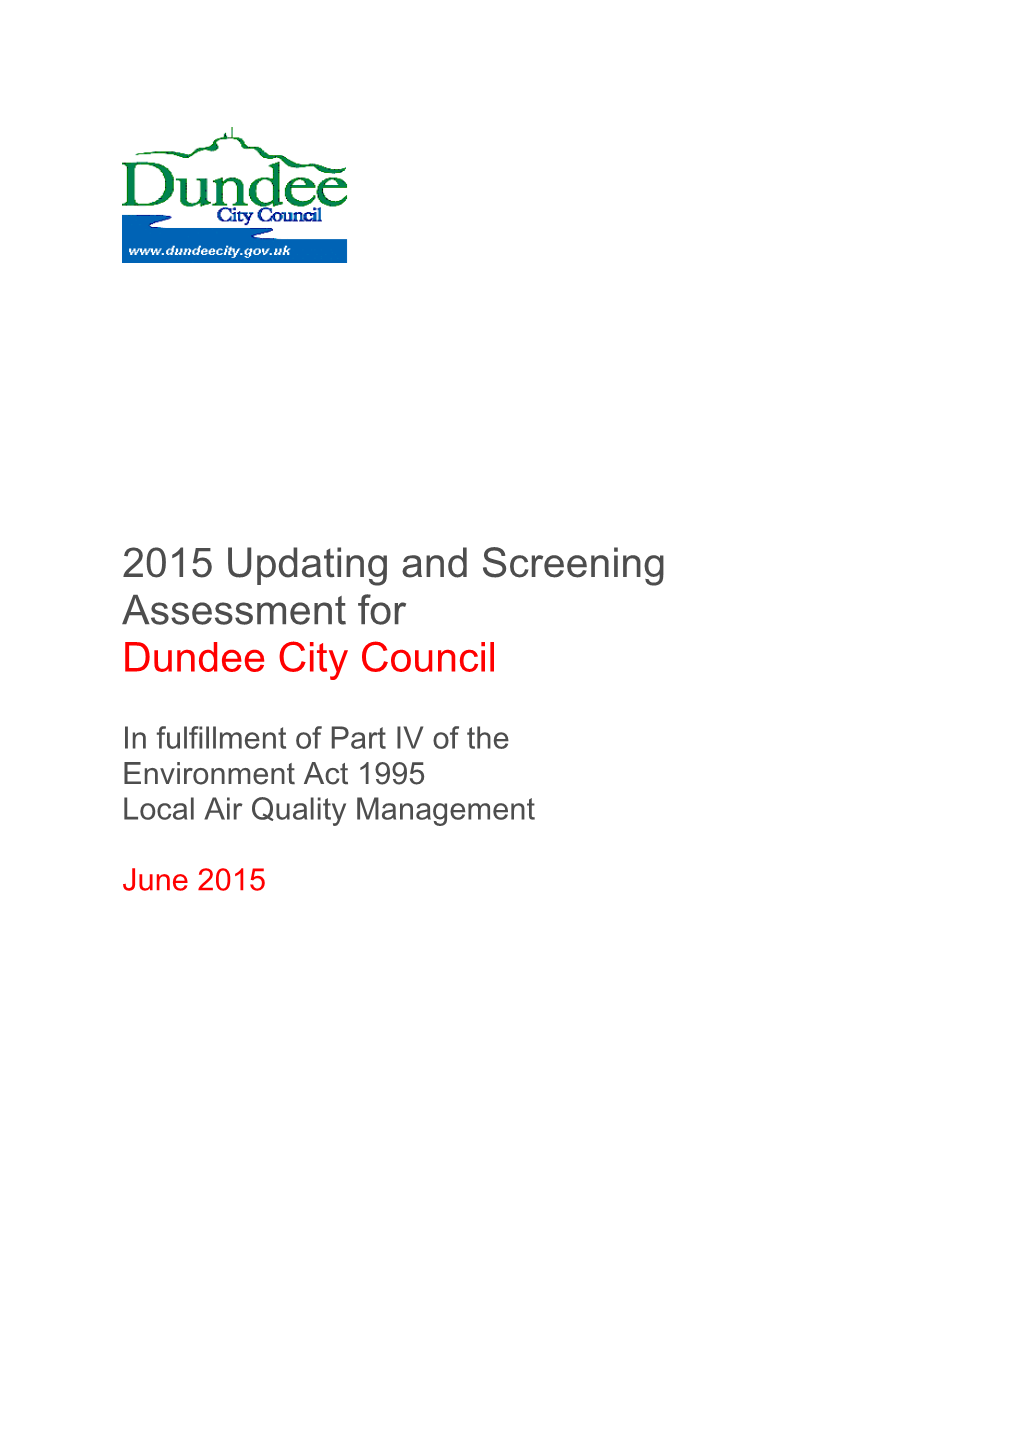 Updating and Screening Assessment 2015 Dundee City Council